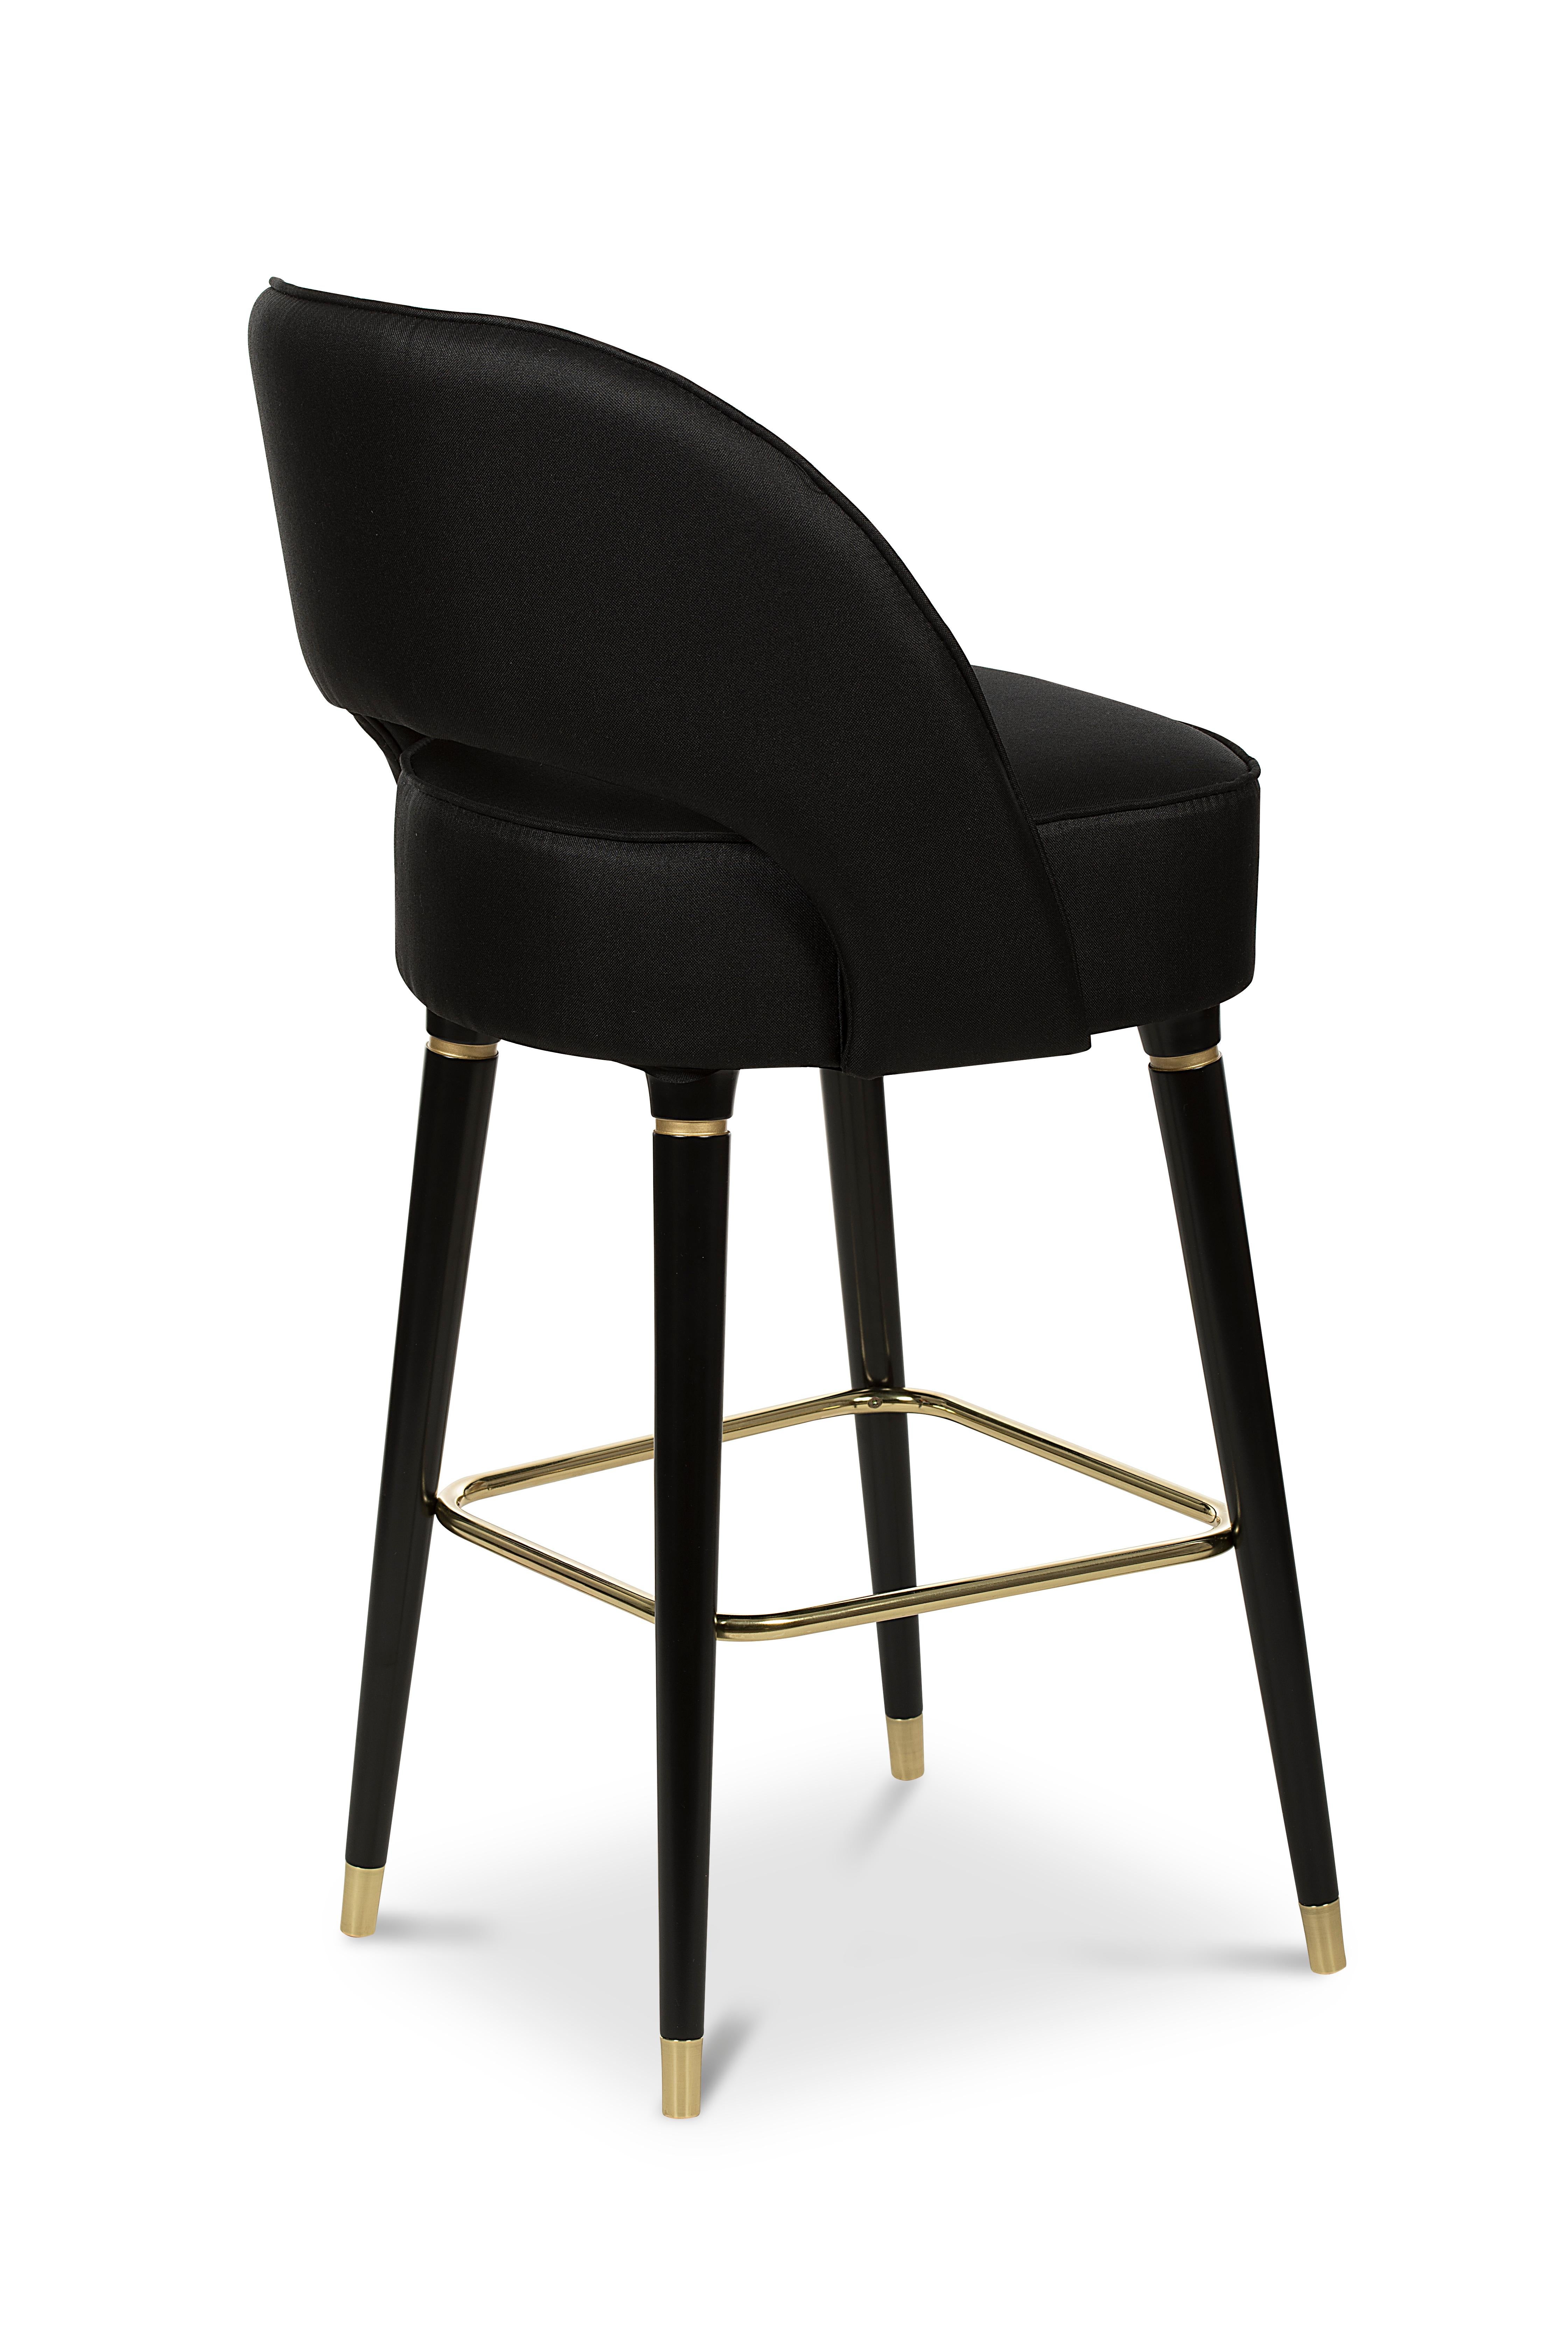 Portuguese Collins Bar Chair in Black with Brass Detail by Essential Home For Sale